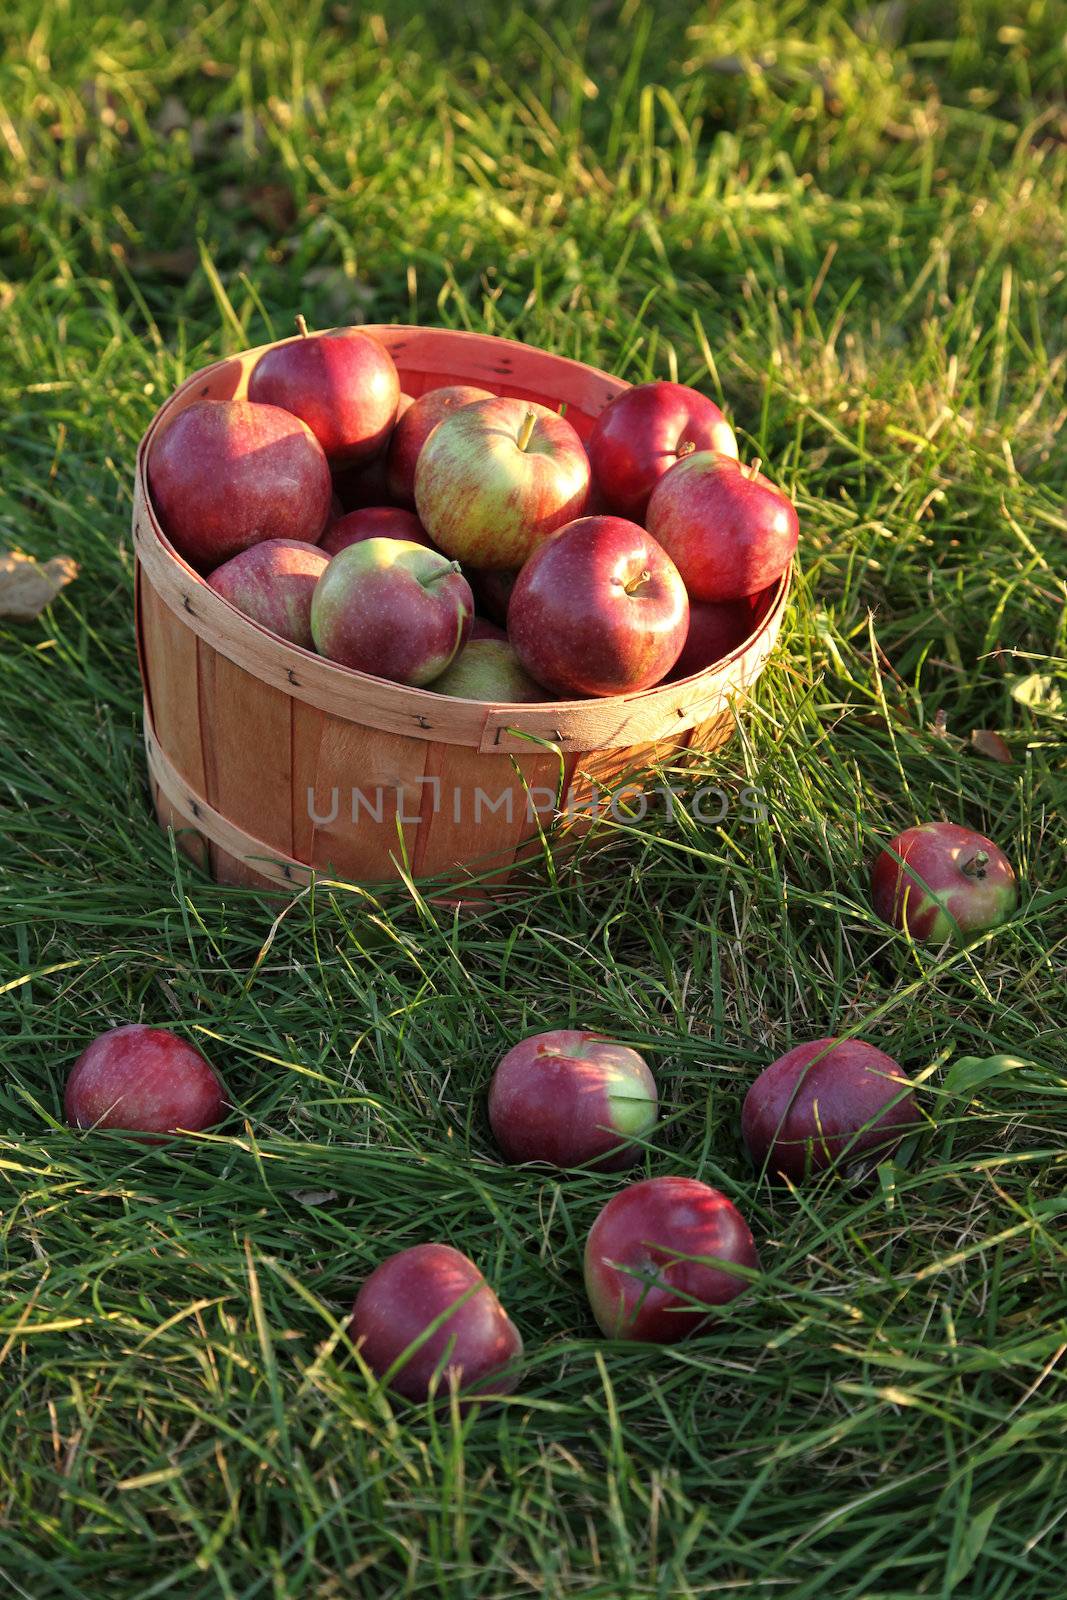 Basket of apples in the grass by Sandralise